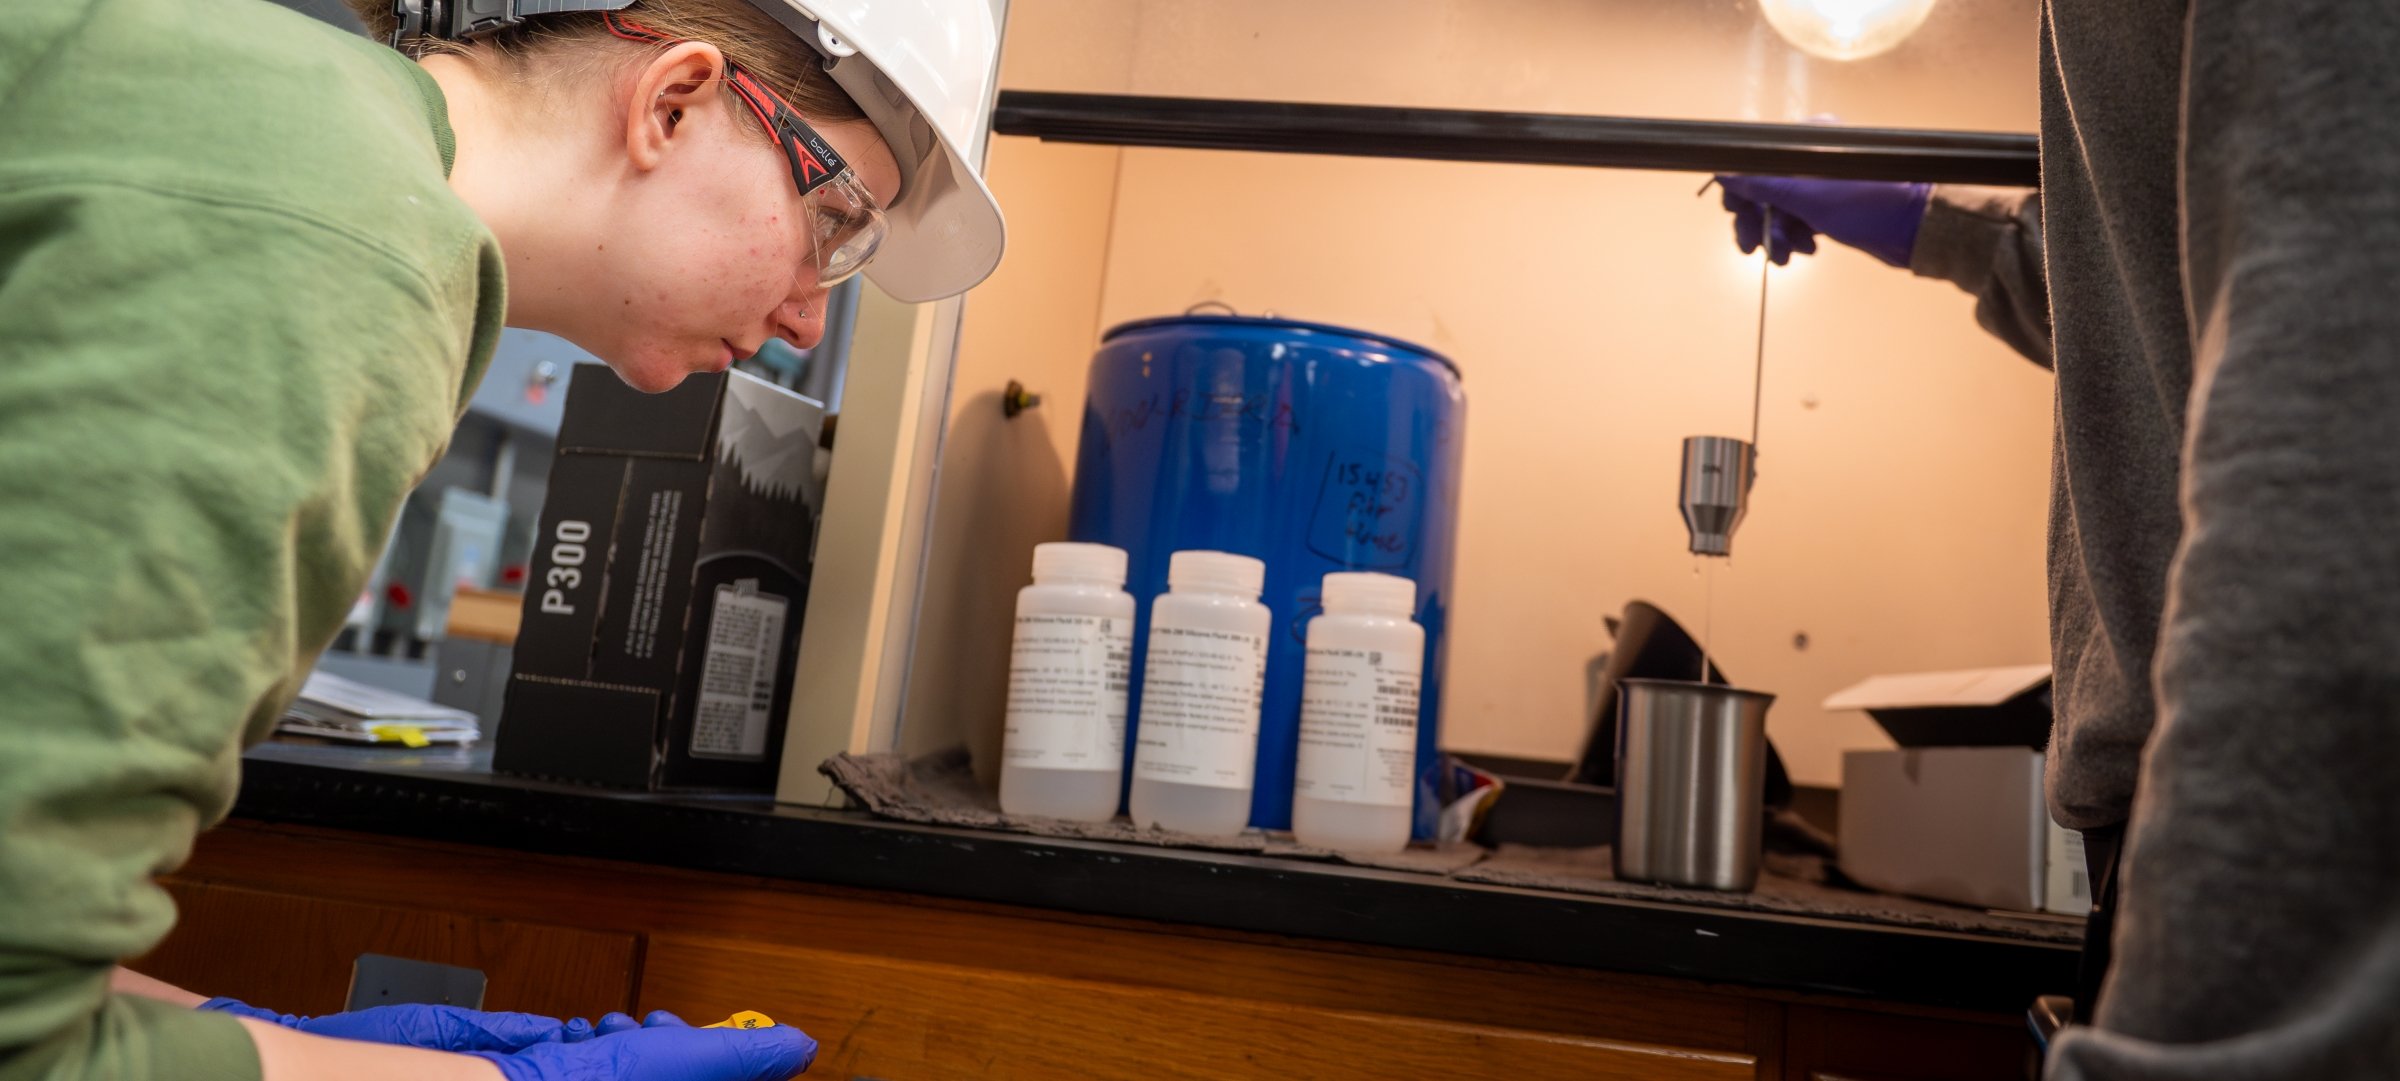 Chemical engineering student working in a lab with safety glasses and hard hat.